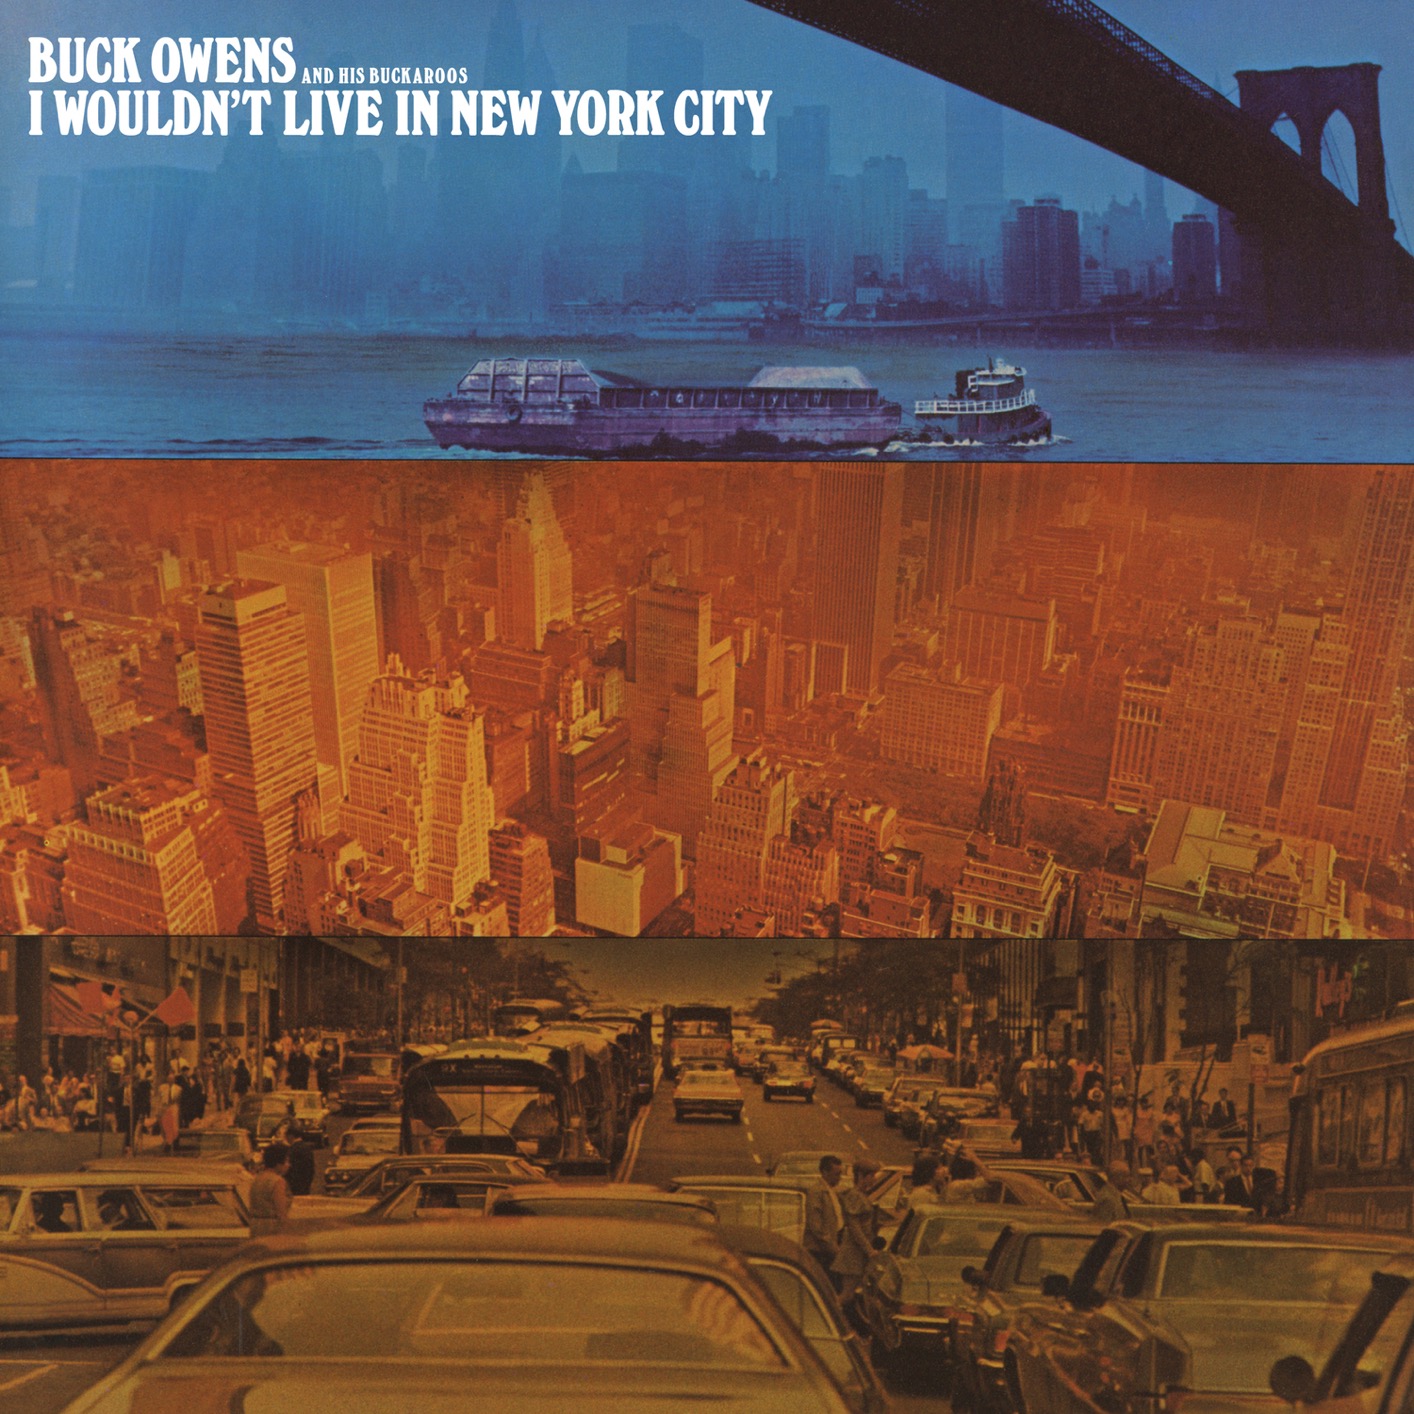 Buck Owens and His Buckaroos - I Wouldn’t Live in New York City (Remastered) (1970/2021) [FLAC 24bit/192kHz]